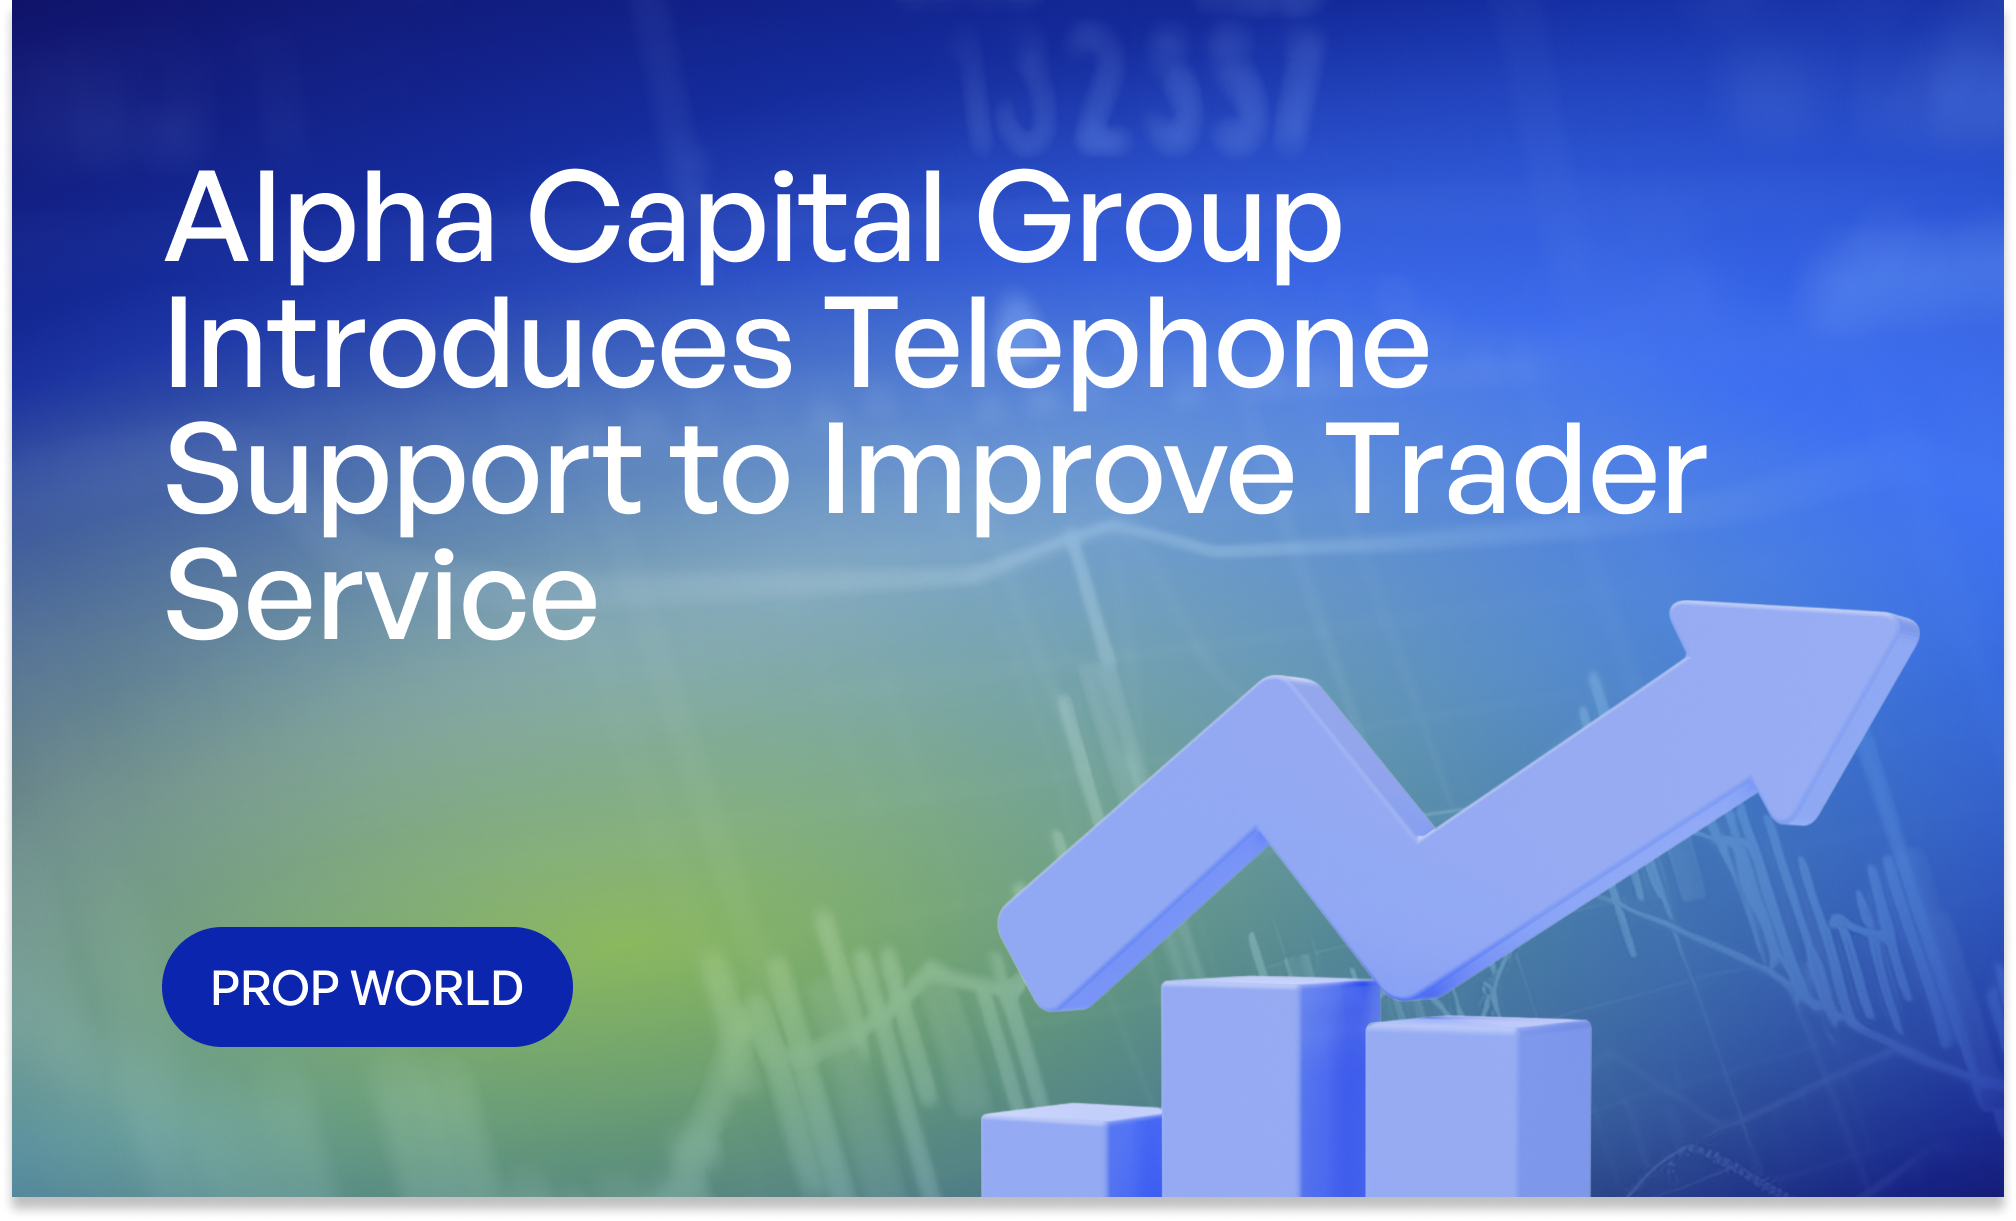 Alpha Capital Group Introduces Telephone Support to Improve Trader Service